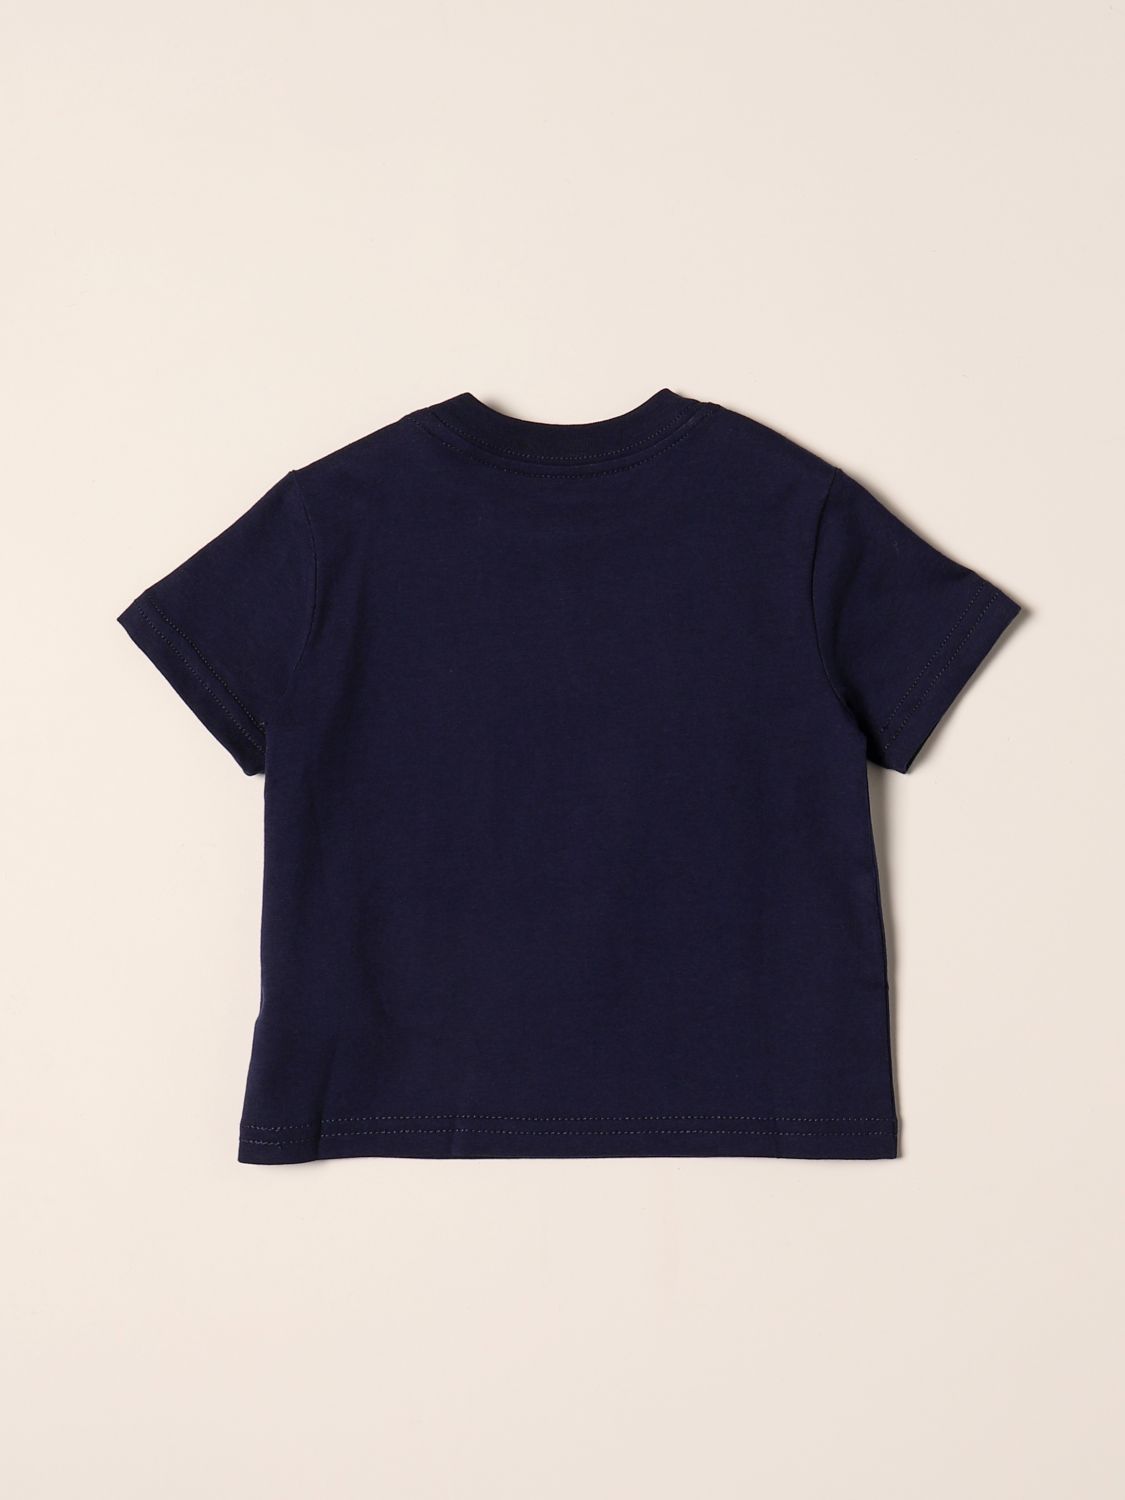 T-shirt Polo Ralph Lauren: T-shirt Polo Ralph Lauren in cotone blue navy 2